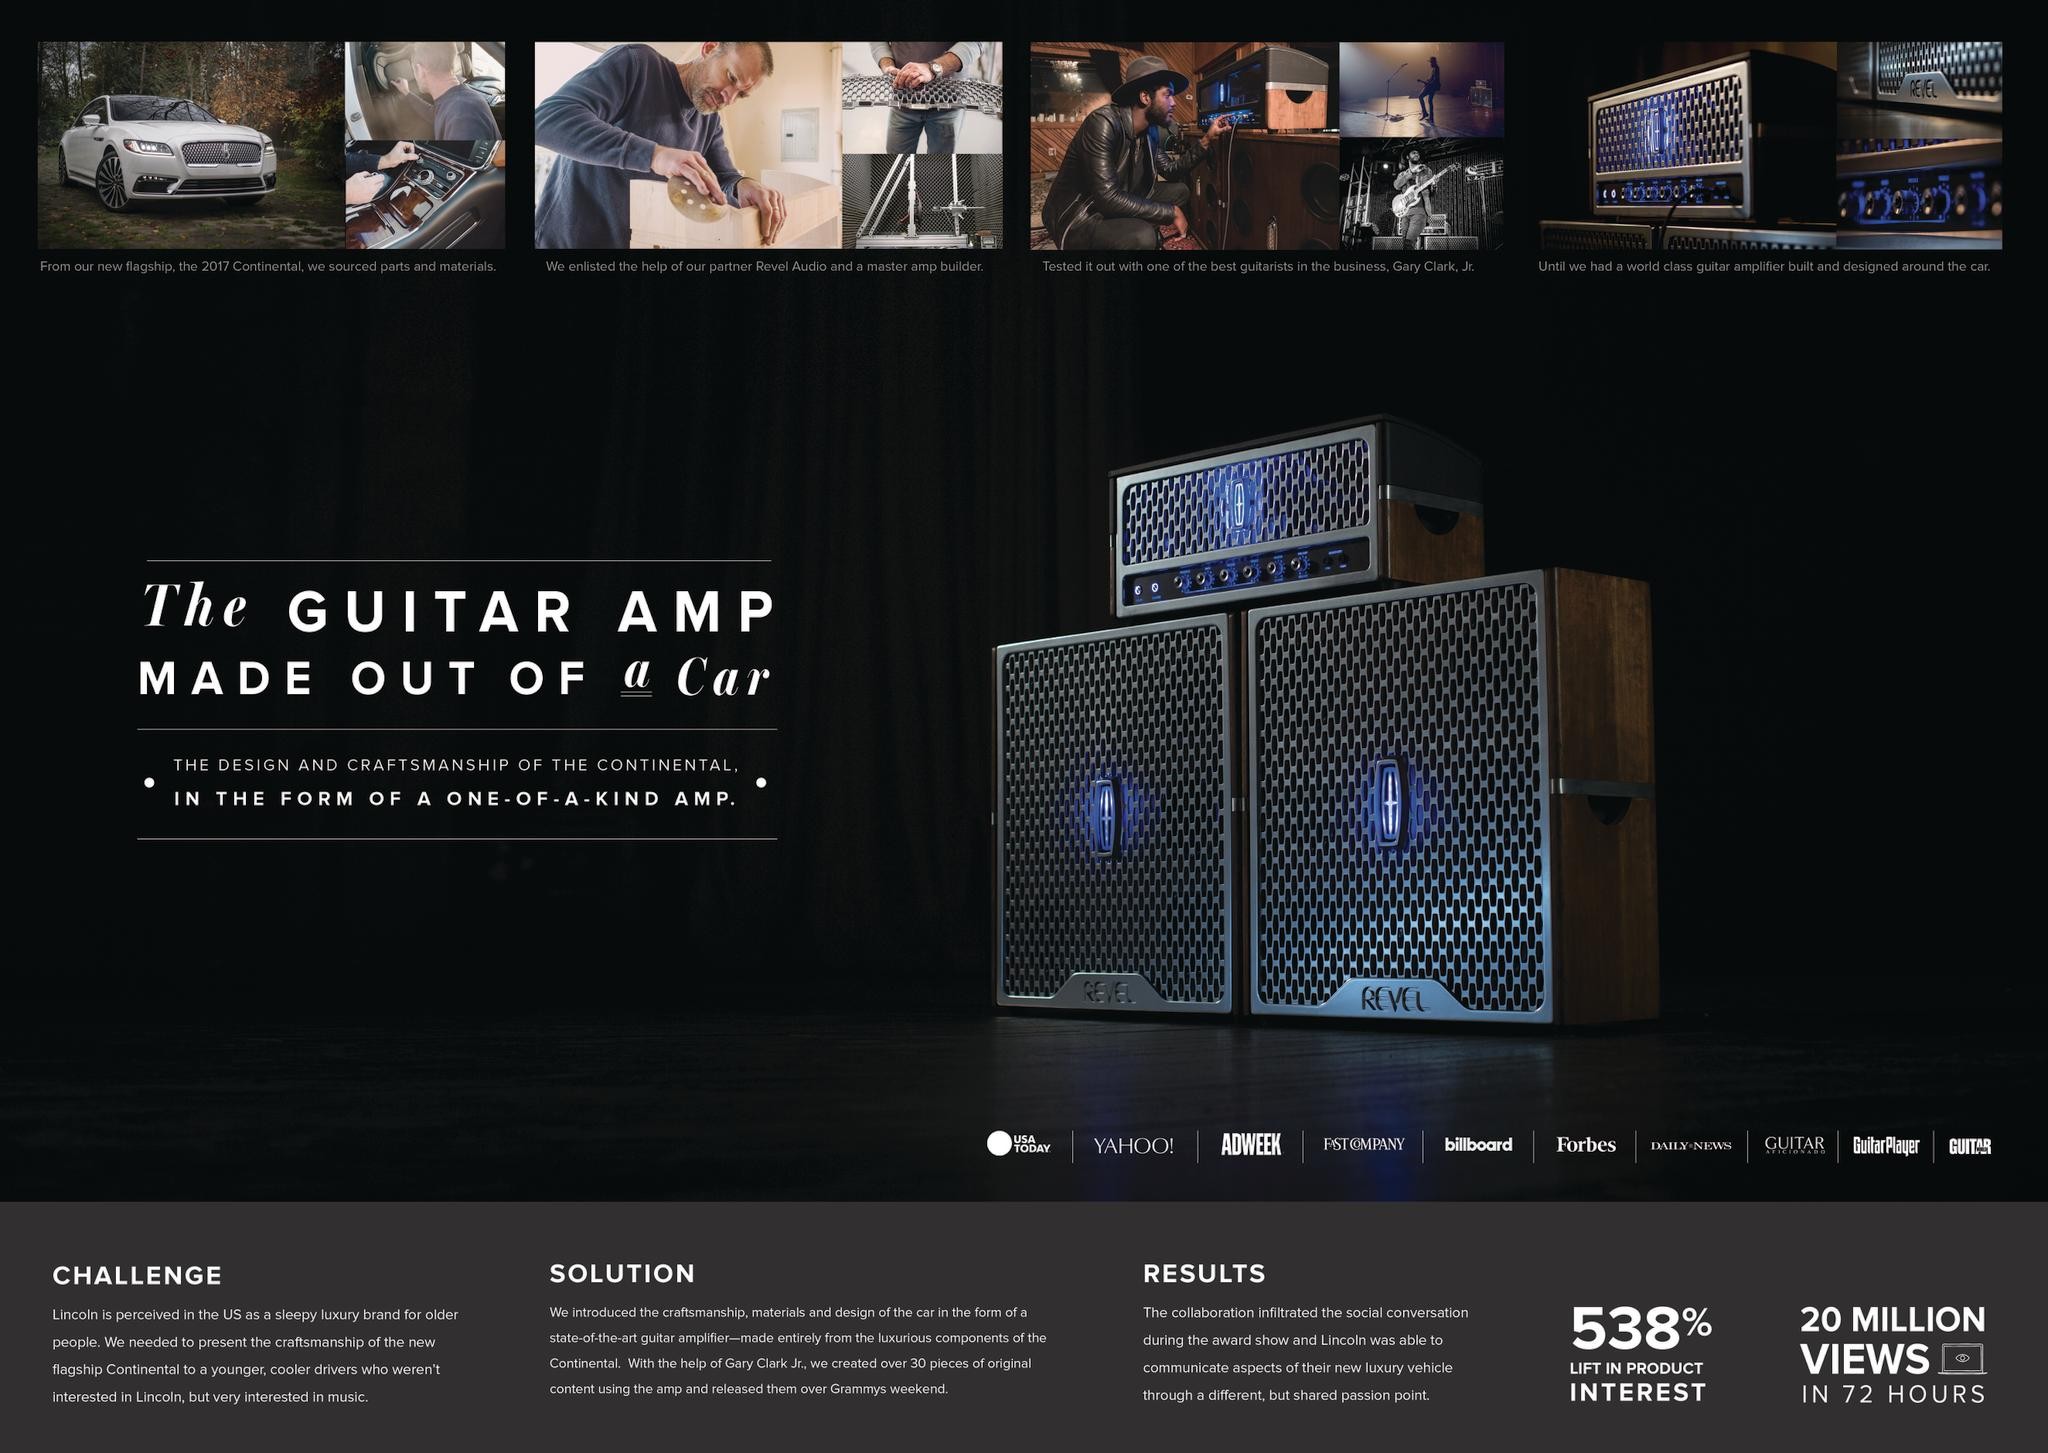 “The Guitar Amp Made Out of a Car”